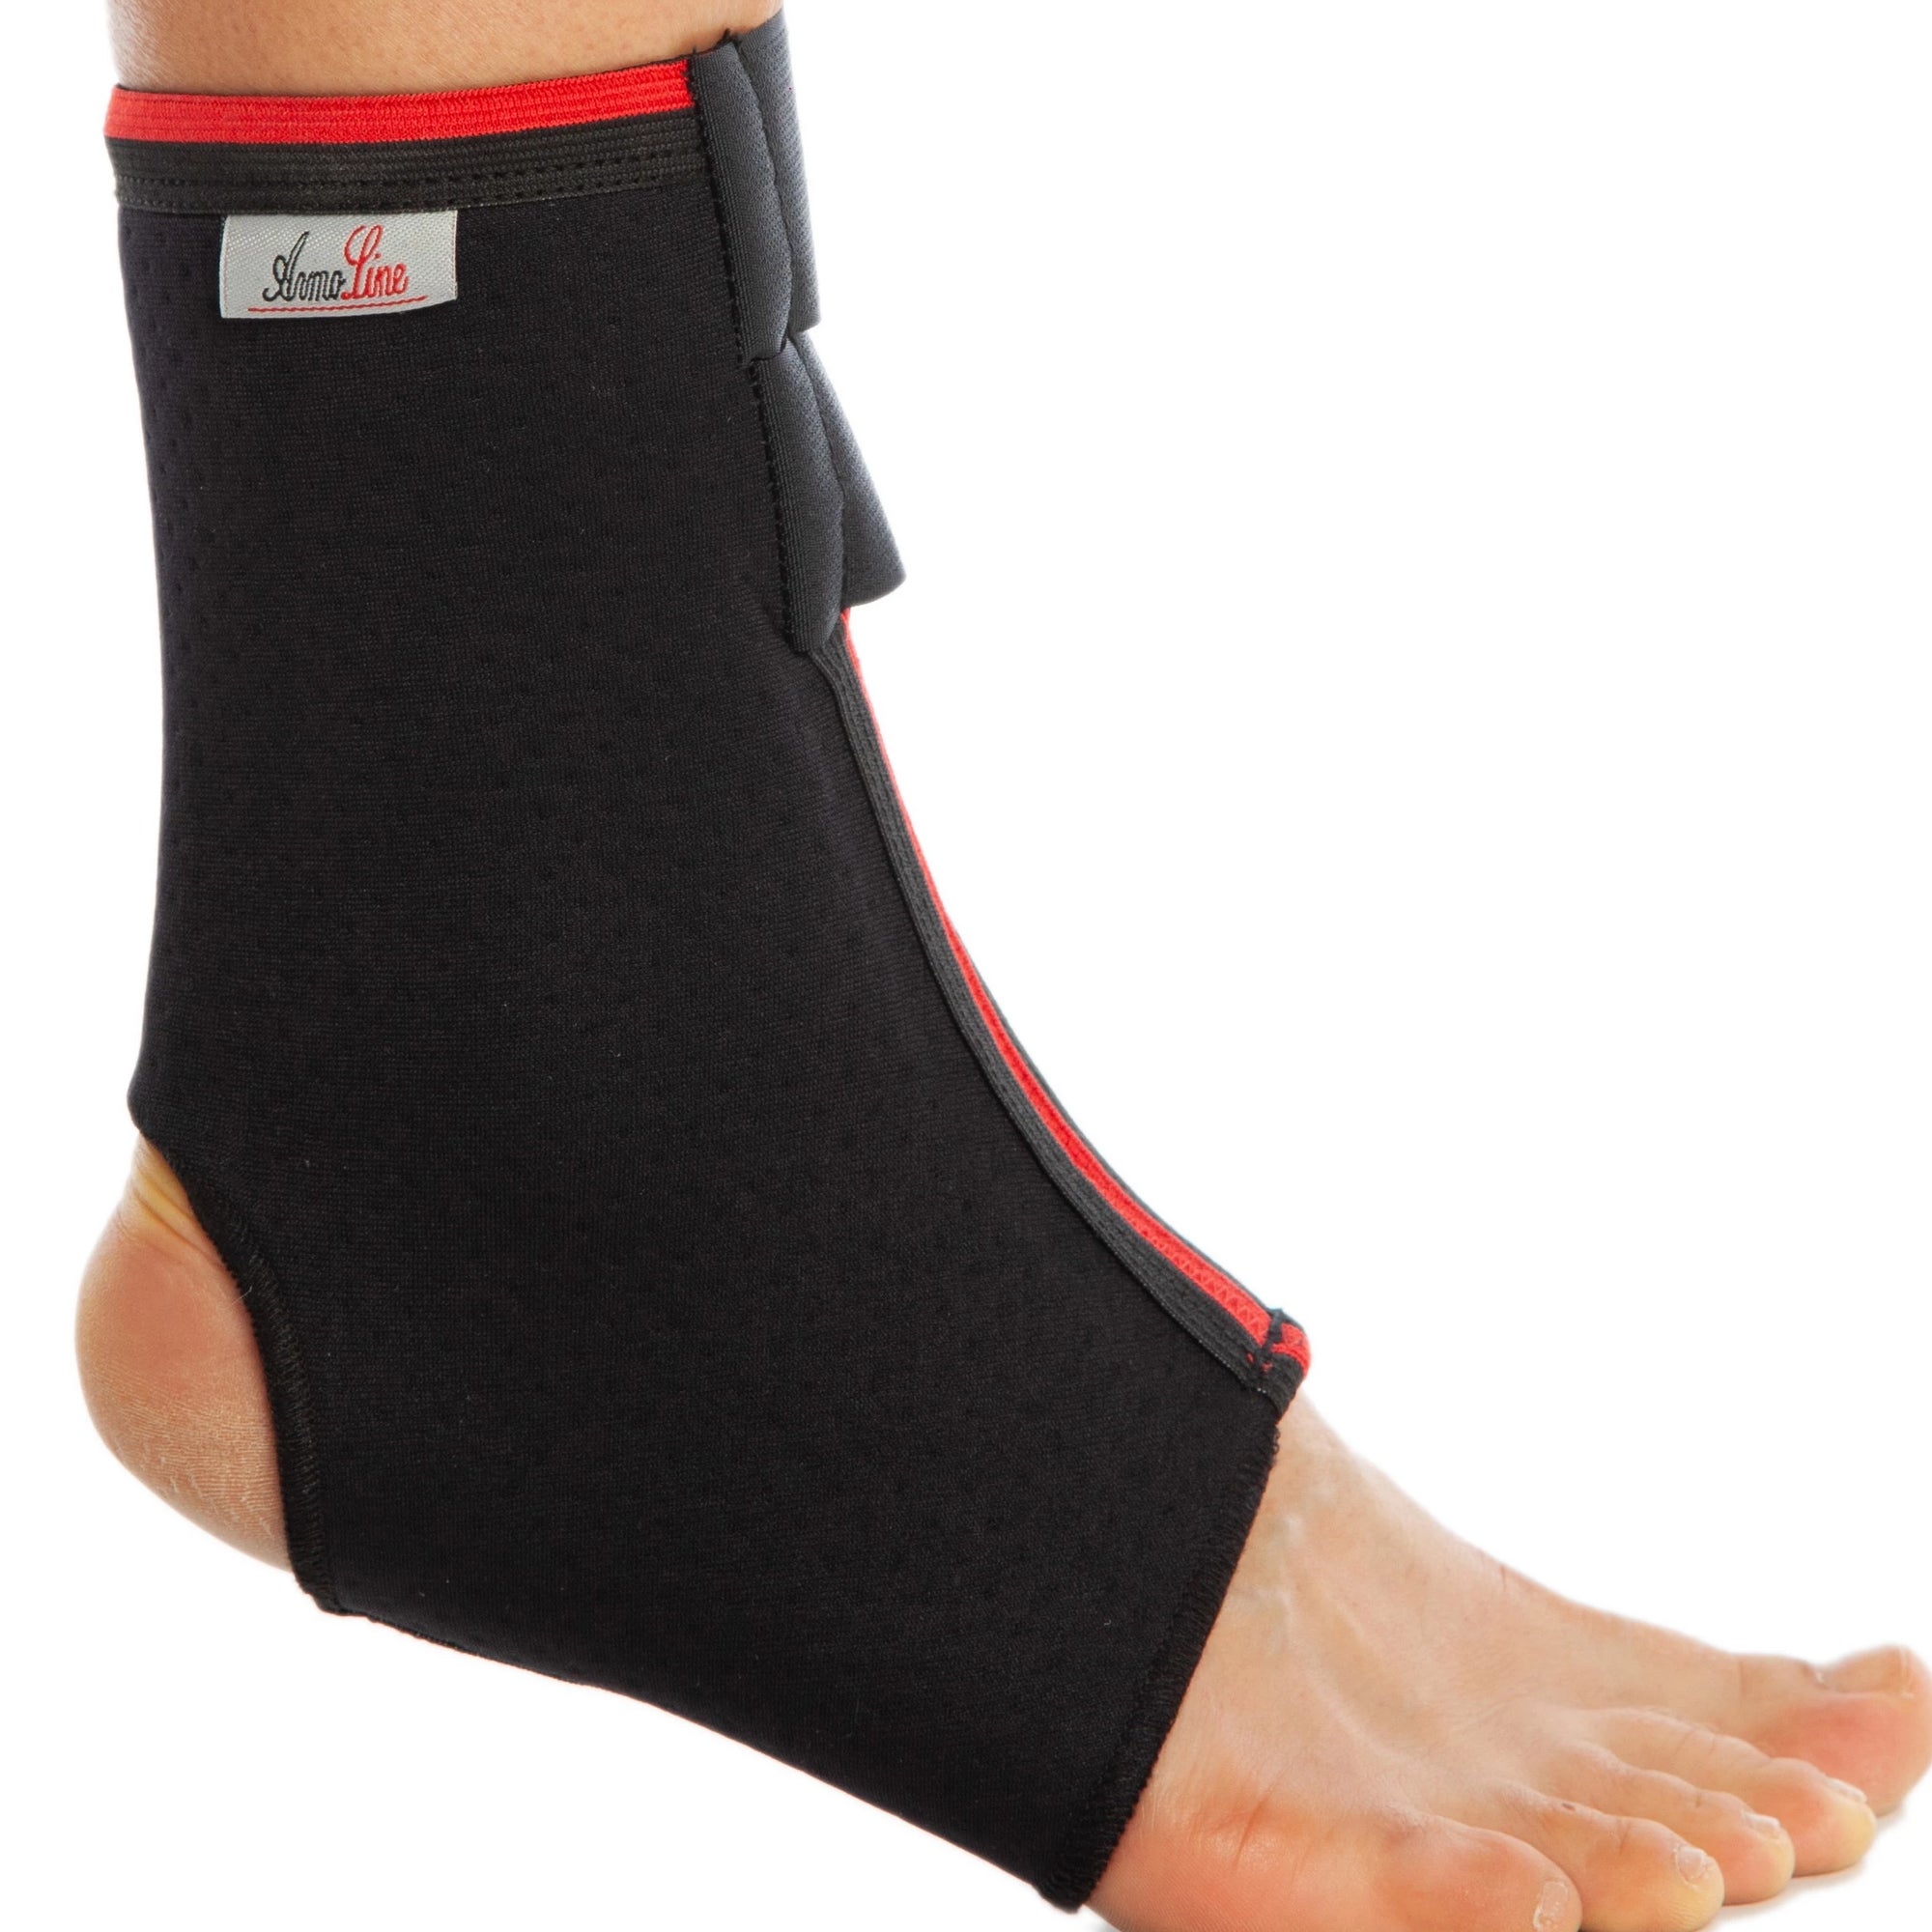 Ankle Support - Basic